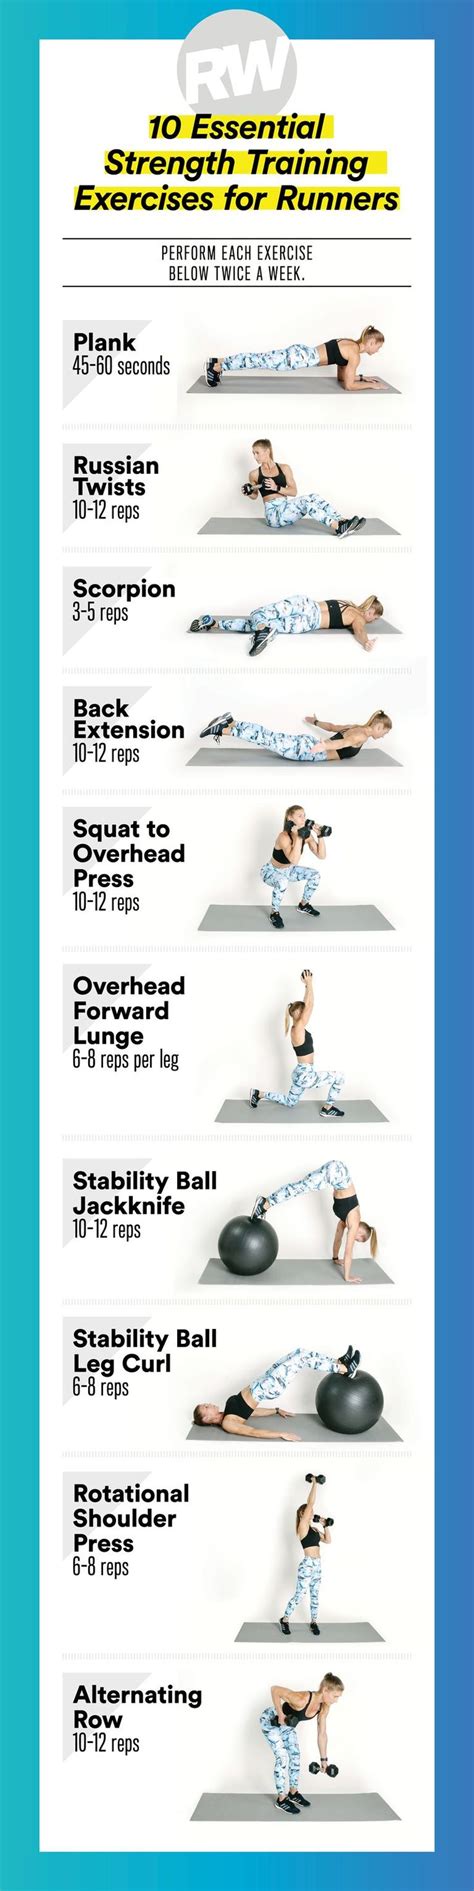 10 Essential Strength Training Exercises You Need to Add ...